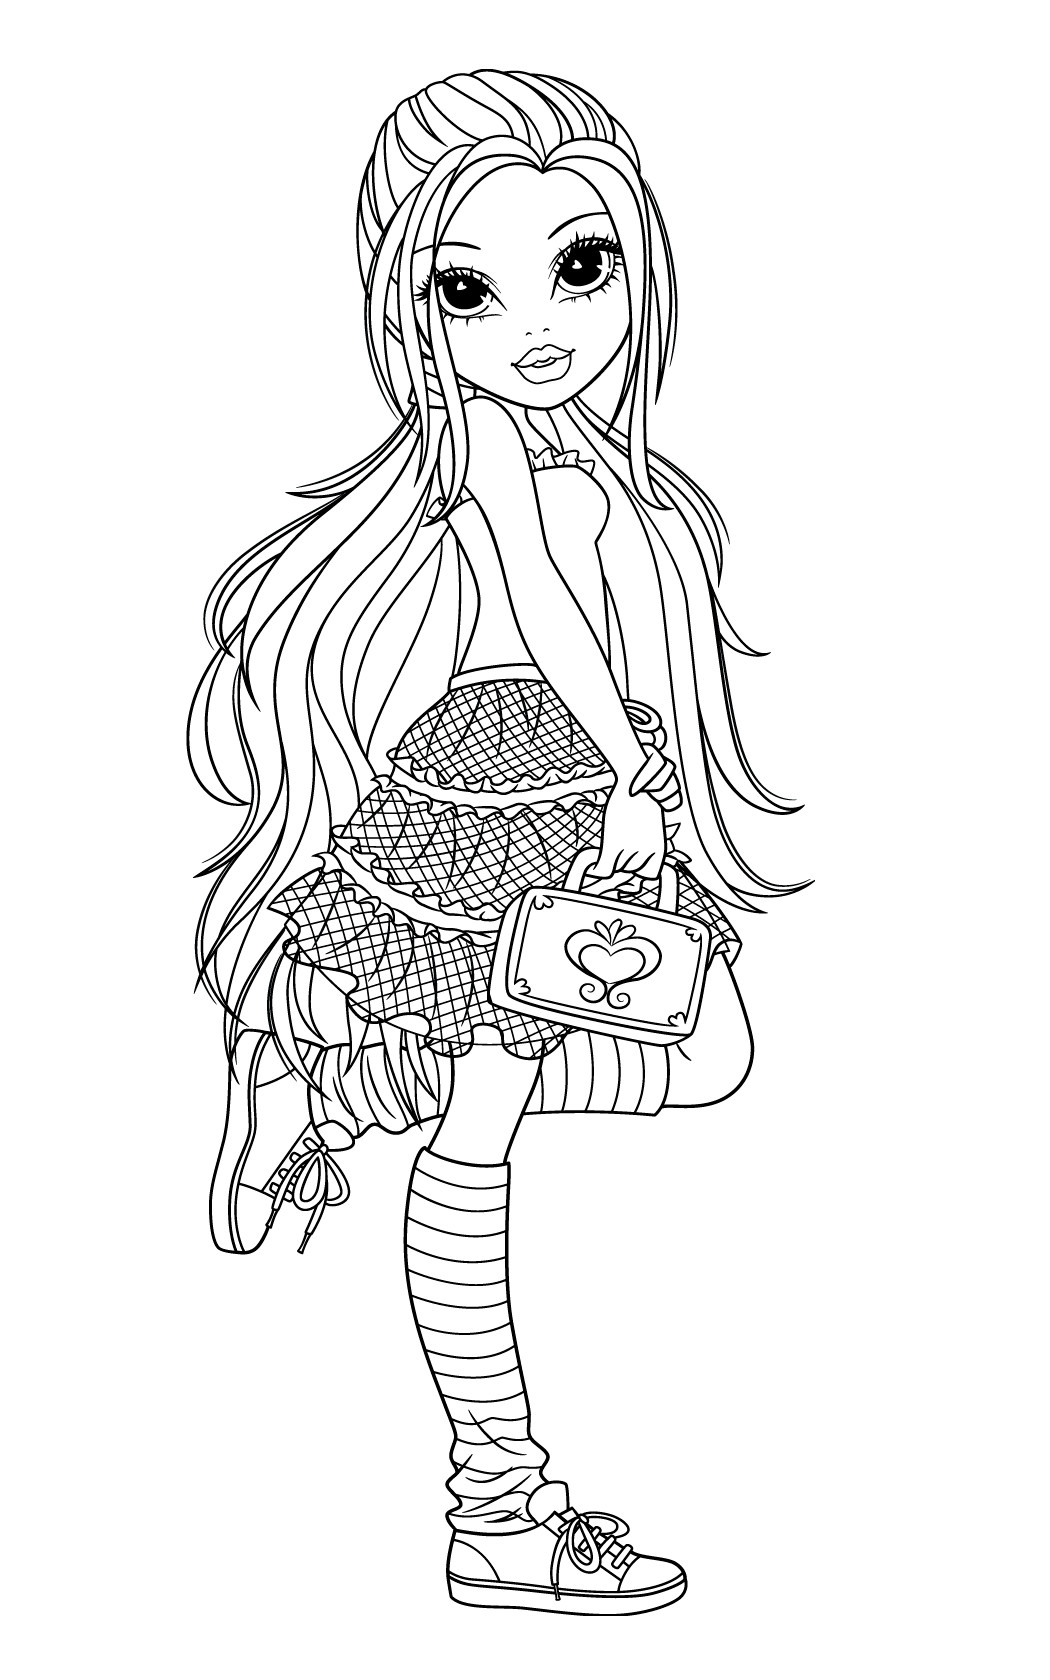 Coloring Pages For Girls To Print
 New Moxie Girlz Coloring Pages will be added frequently so